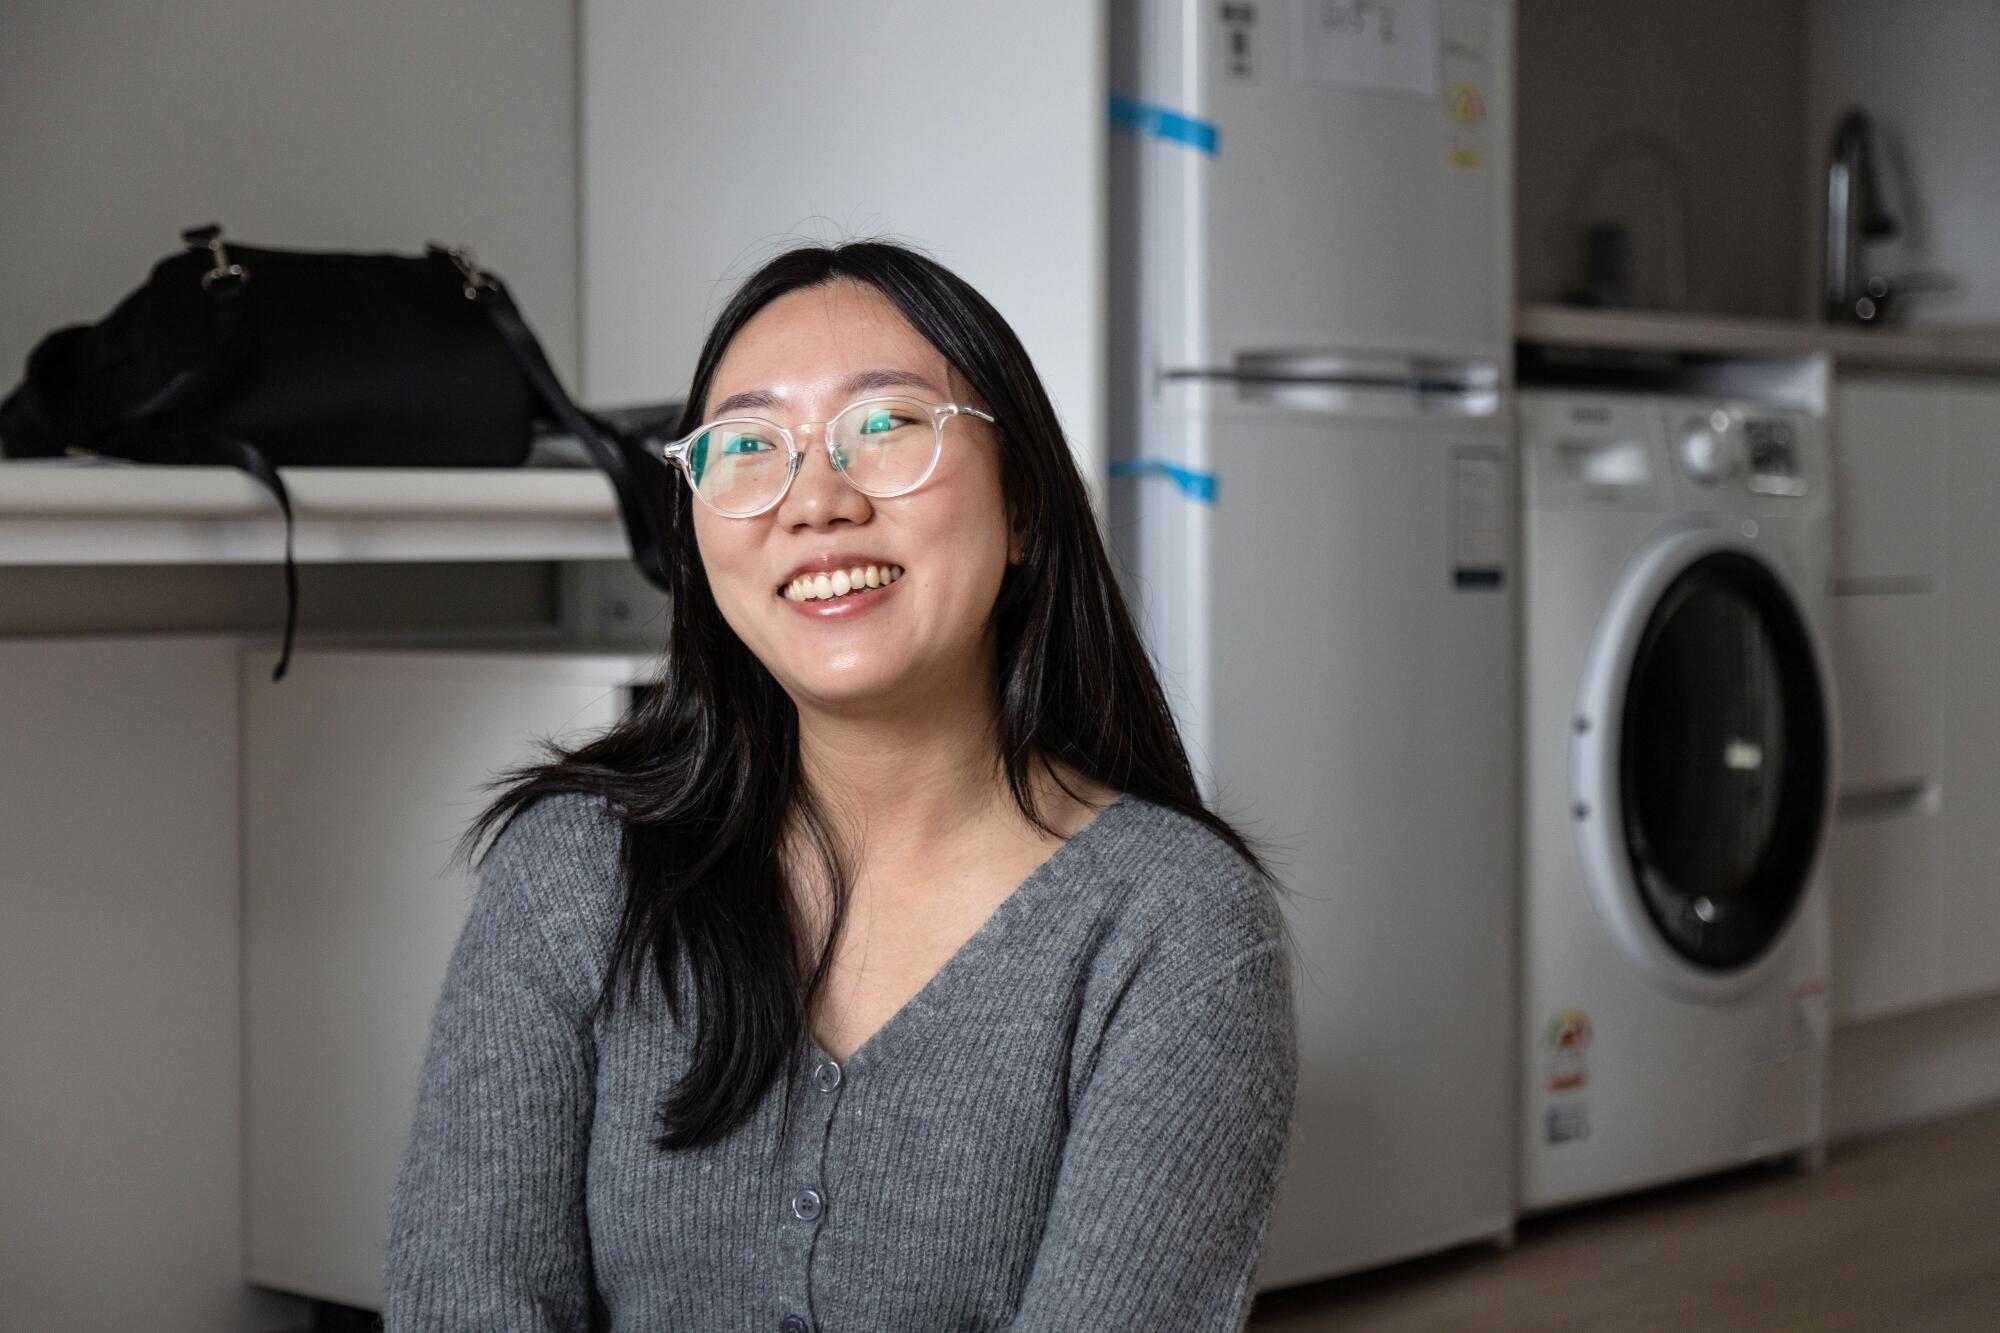 Kim Do-yeon sits and smiles in a room with appliances in the background.